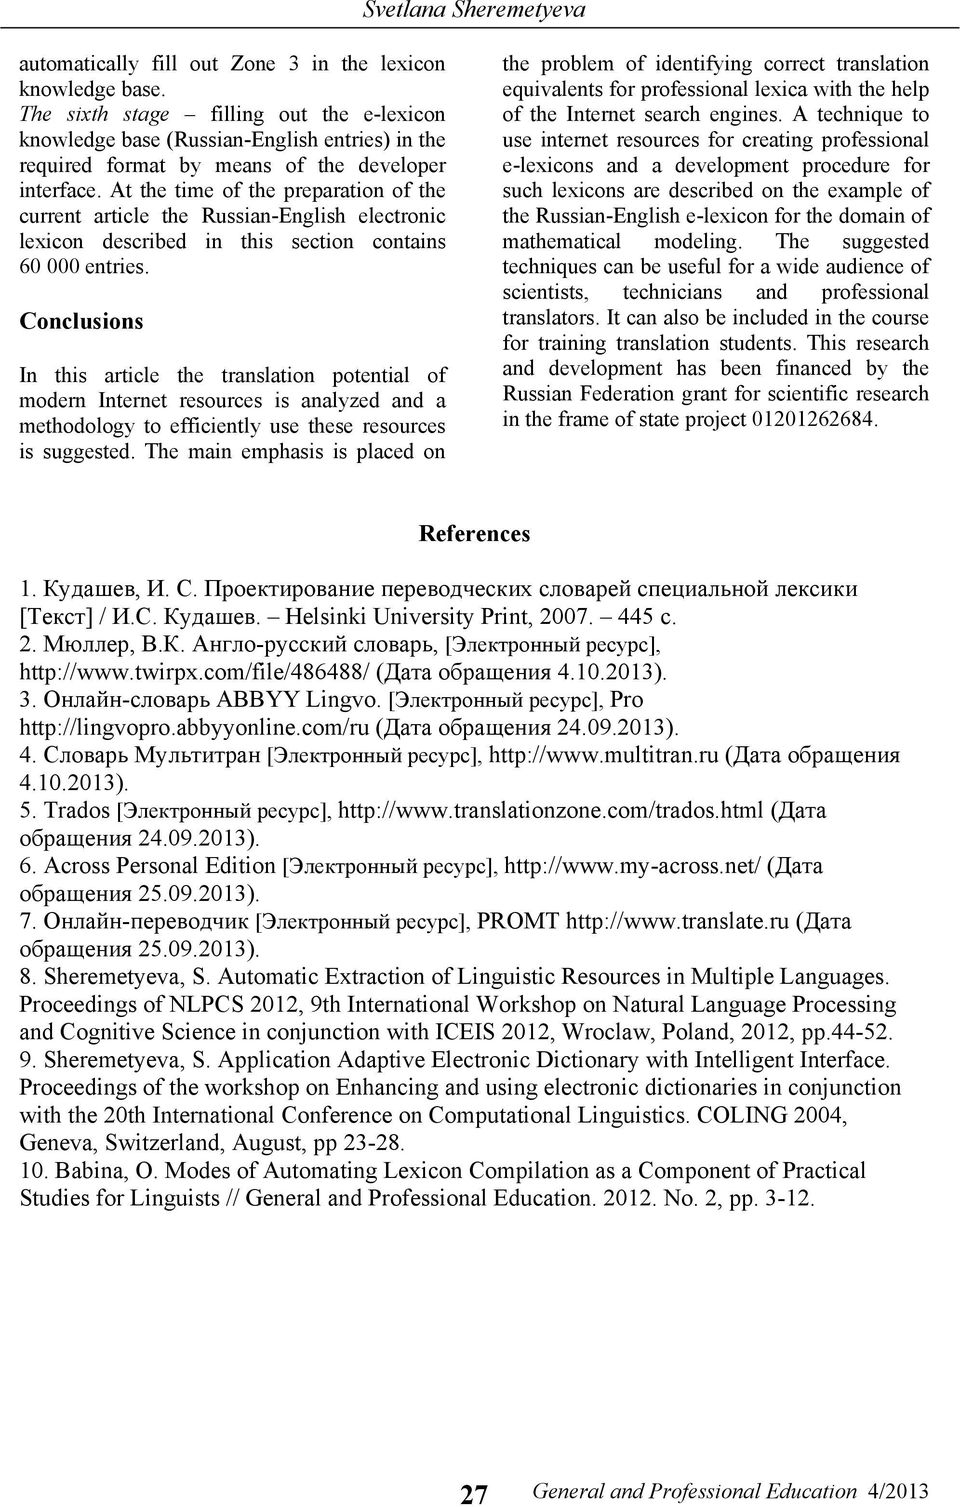 At the time of the preparation of the current article the Russian-English electronic lexicon described in this section contains 60 000 entries.